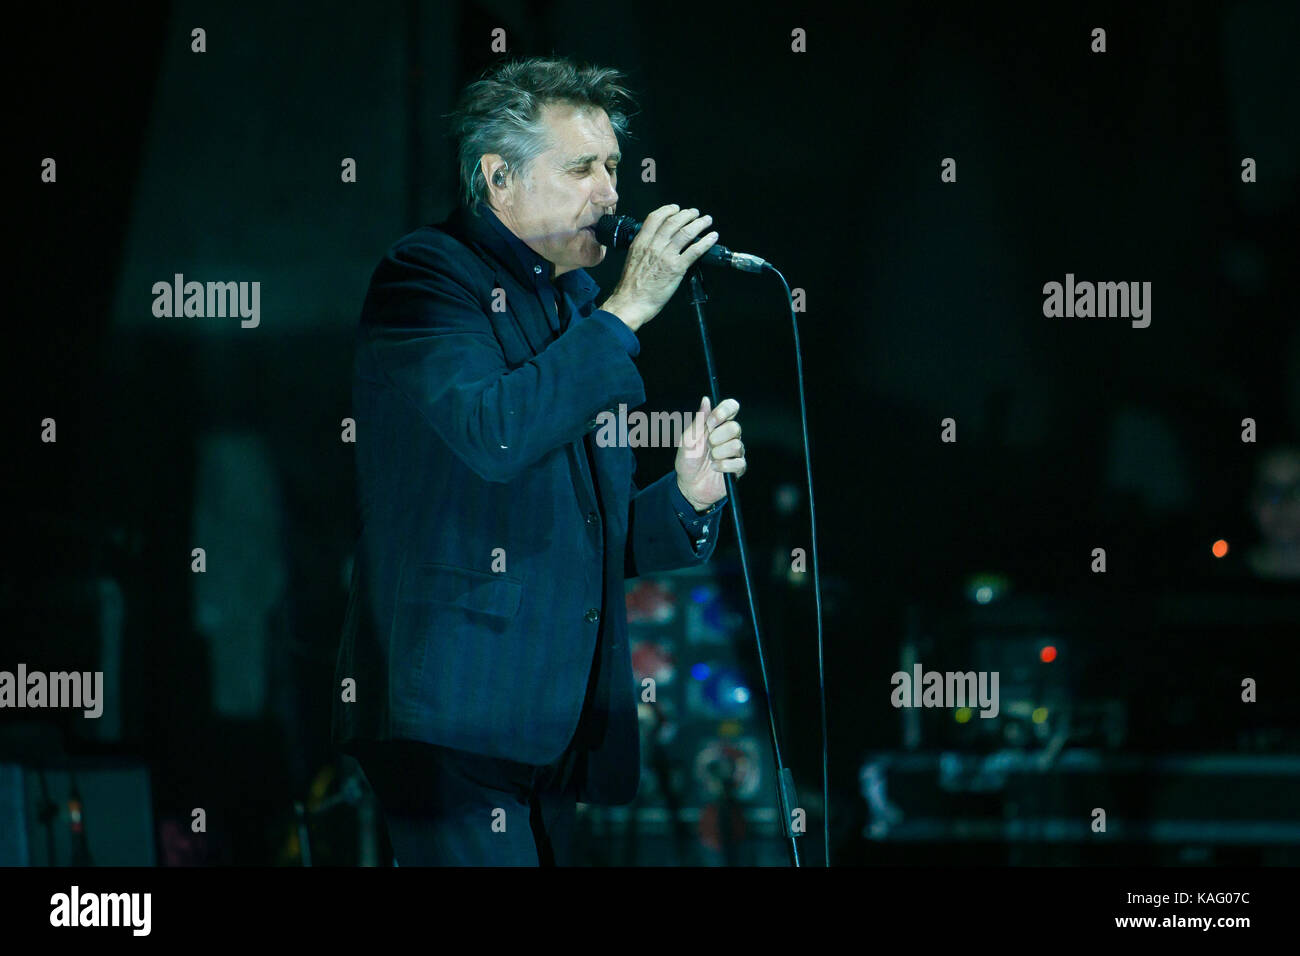 The English singer, songwriter and composer Bryan Ferry performs a live ...